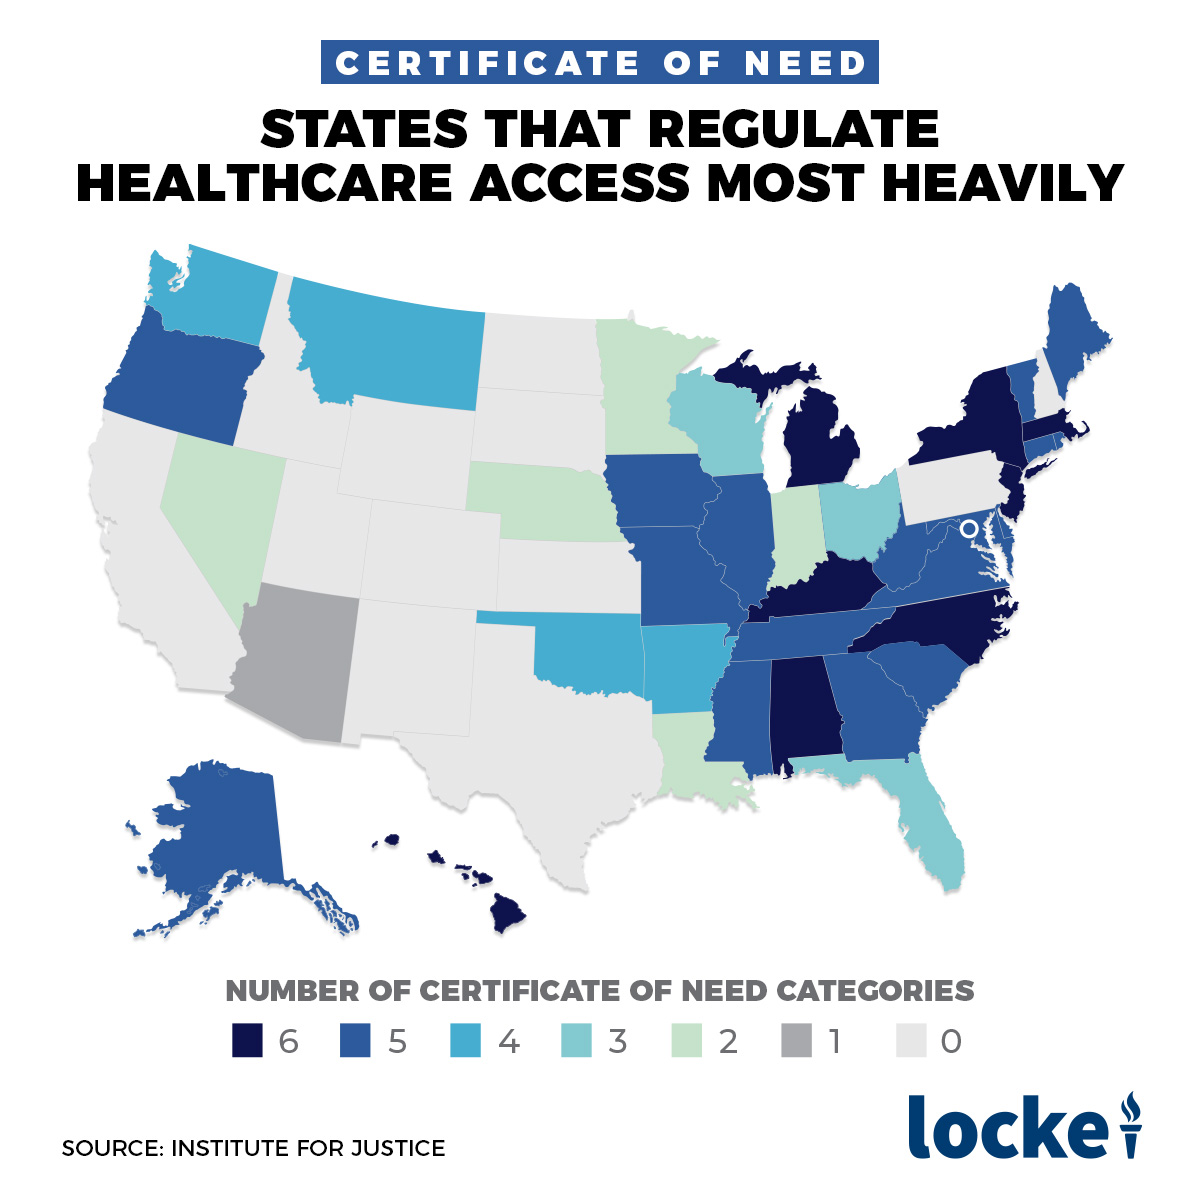 States That Regulate Healthcare Access Most Heavily